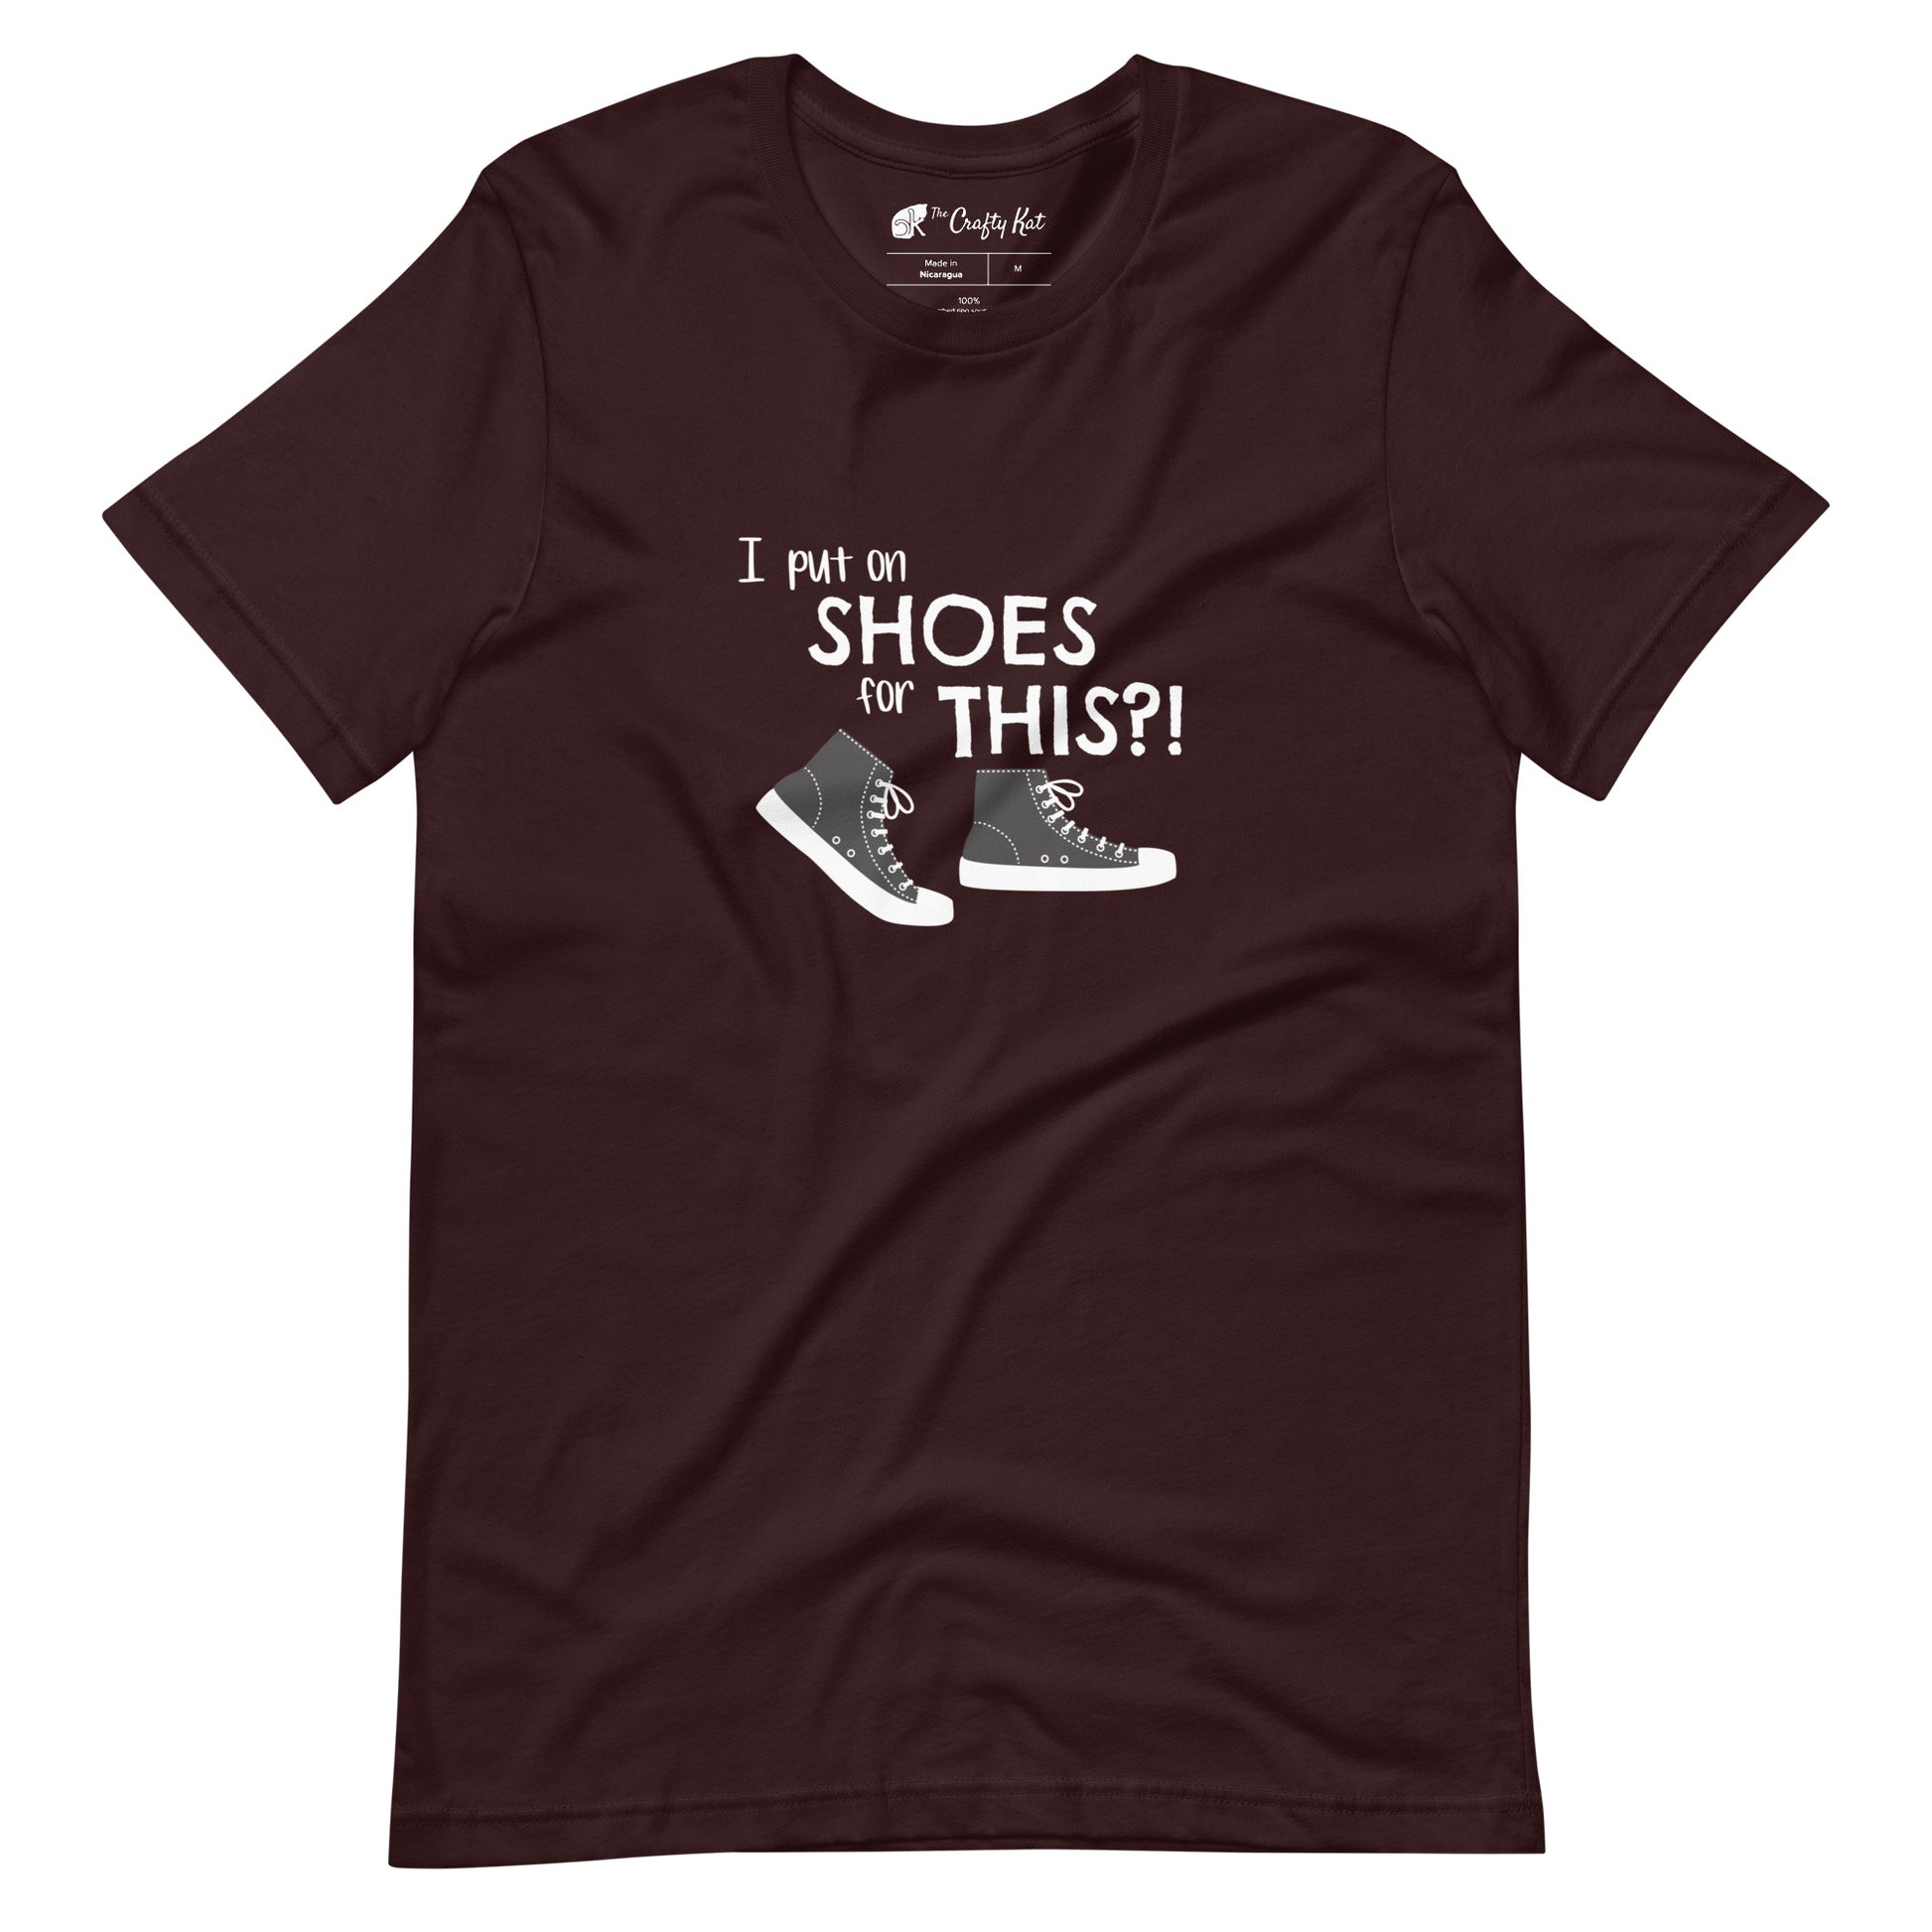 Oxblood Black t-shirt with graphic of black and white canvas "chuck" sneakers and text: "I put on SHOES for THIS?!"